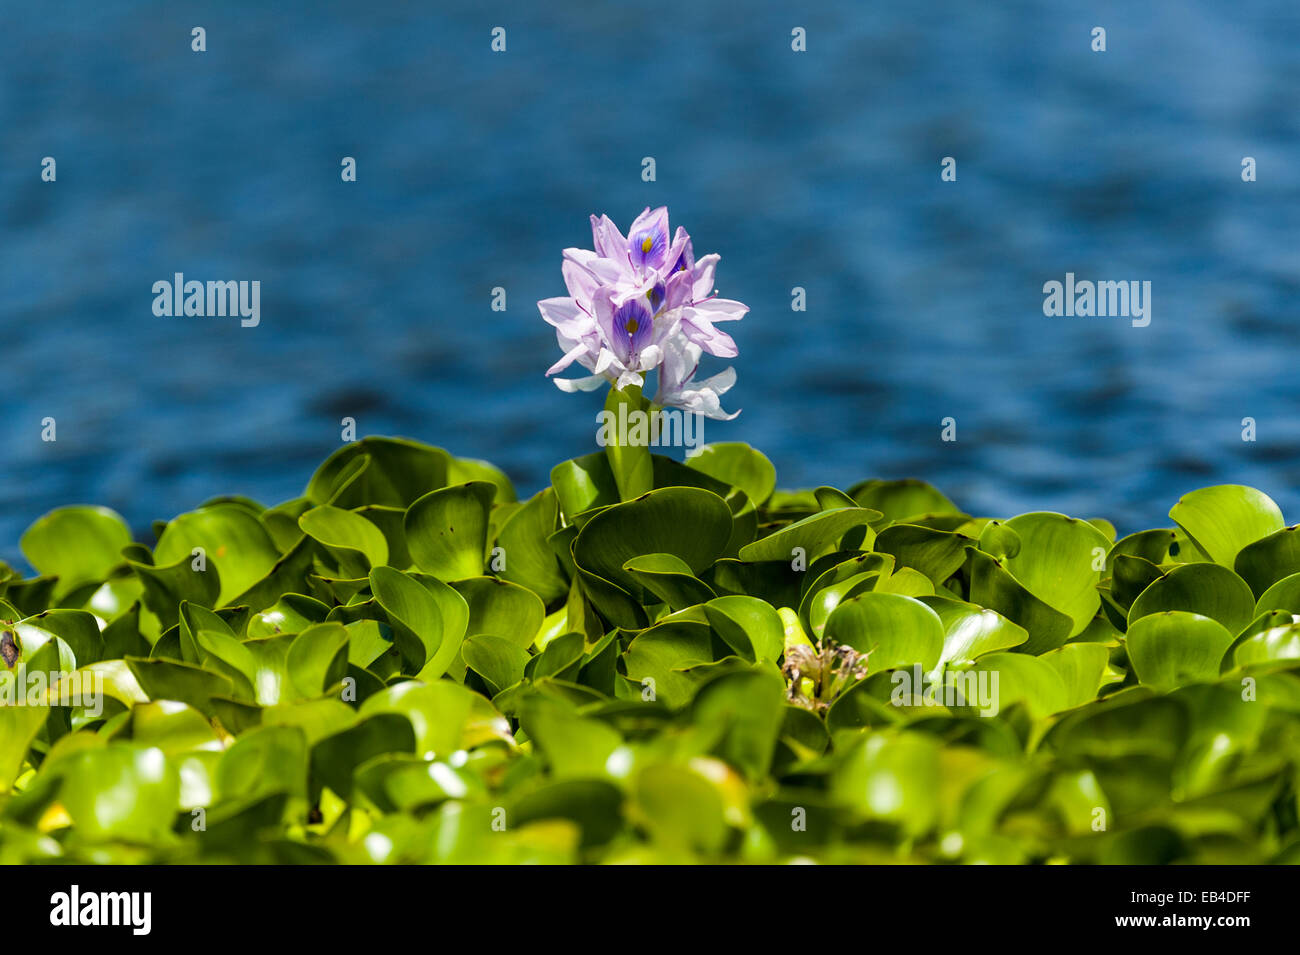 A bright purple flower stands above the dense mat of invasive water hyacinth choking the surface of a freshwater lake. Stock Photo